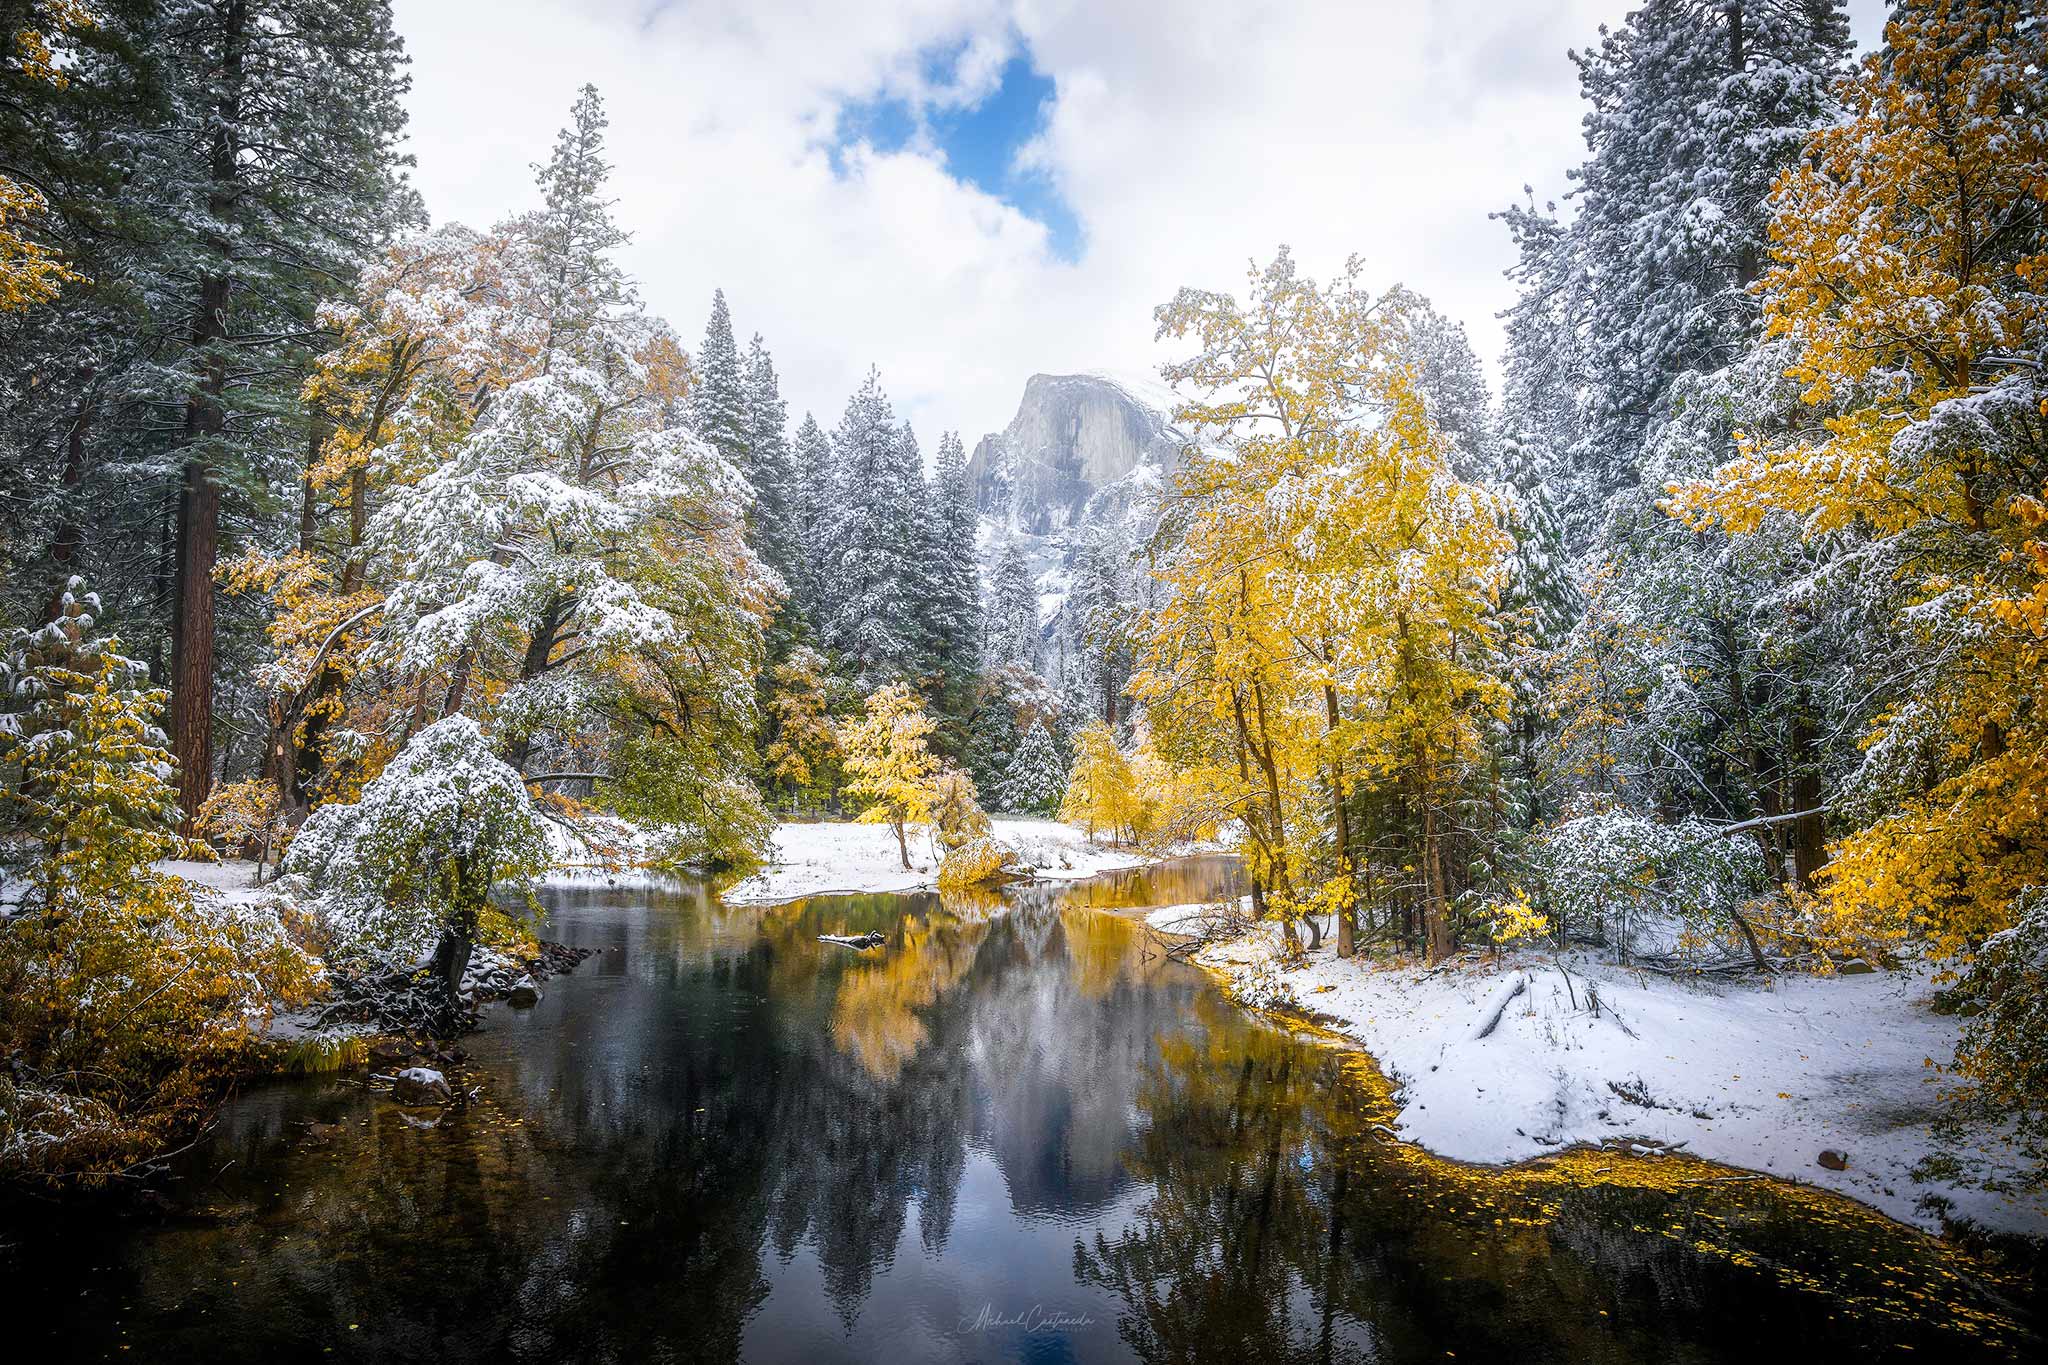 When snow meets fall Beautiful photos capture 'snowliage' in Yosemite